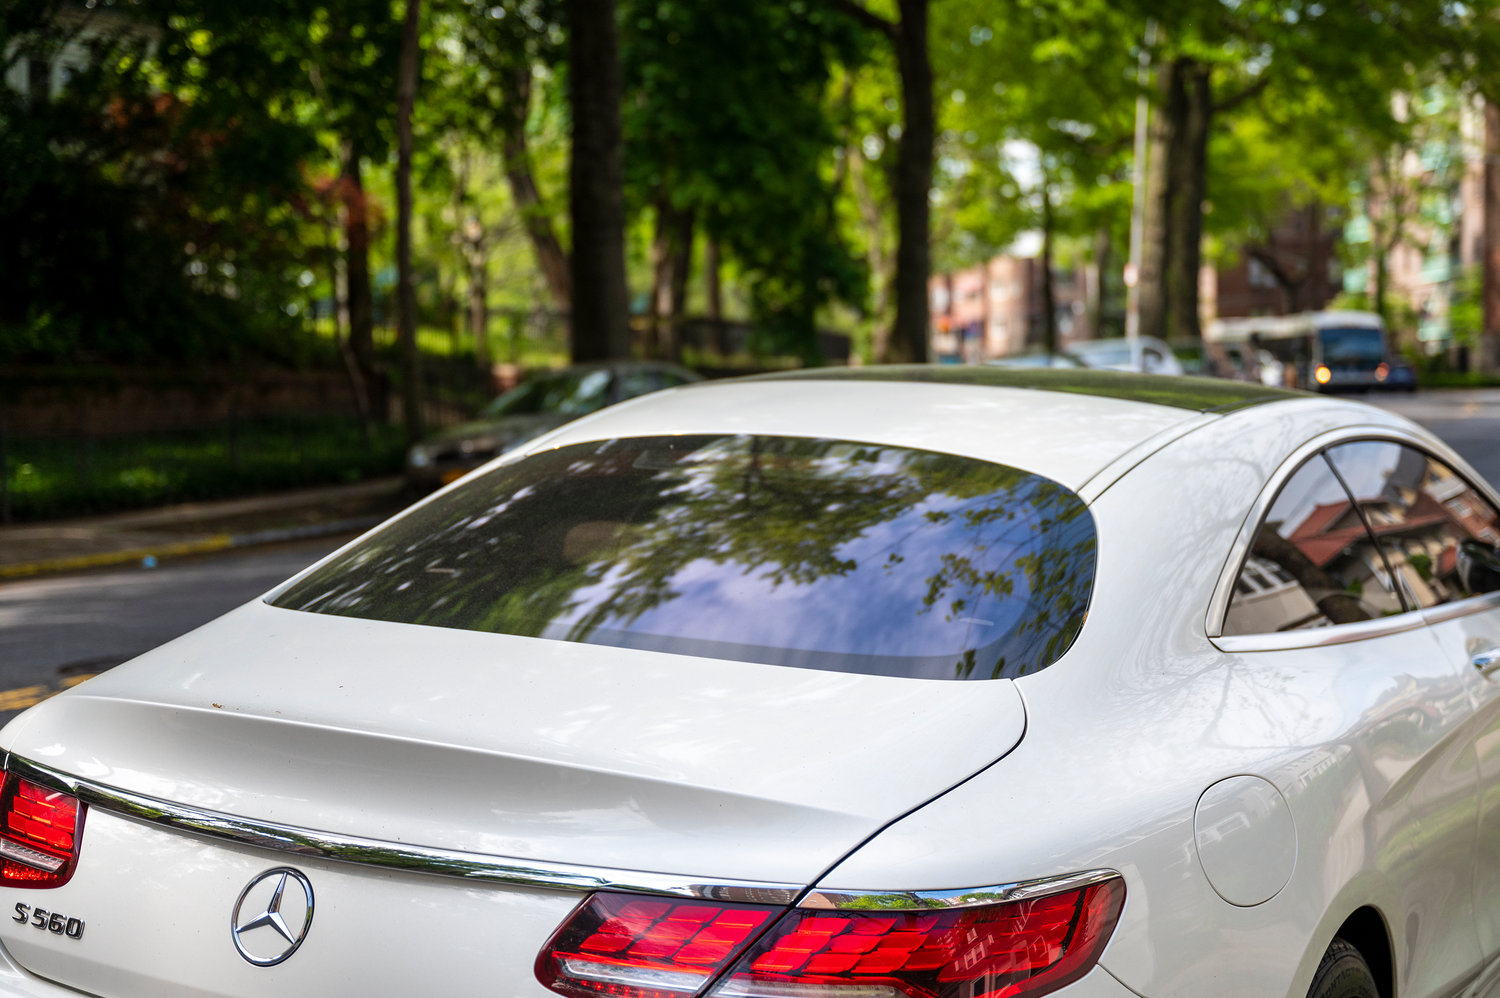 A Mercedes-Benz parked in the Northwest Bronx on Monday, May 16, 2022.